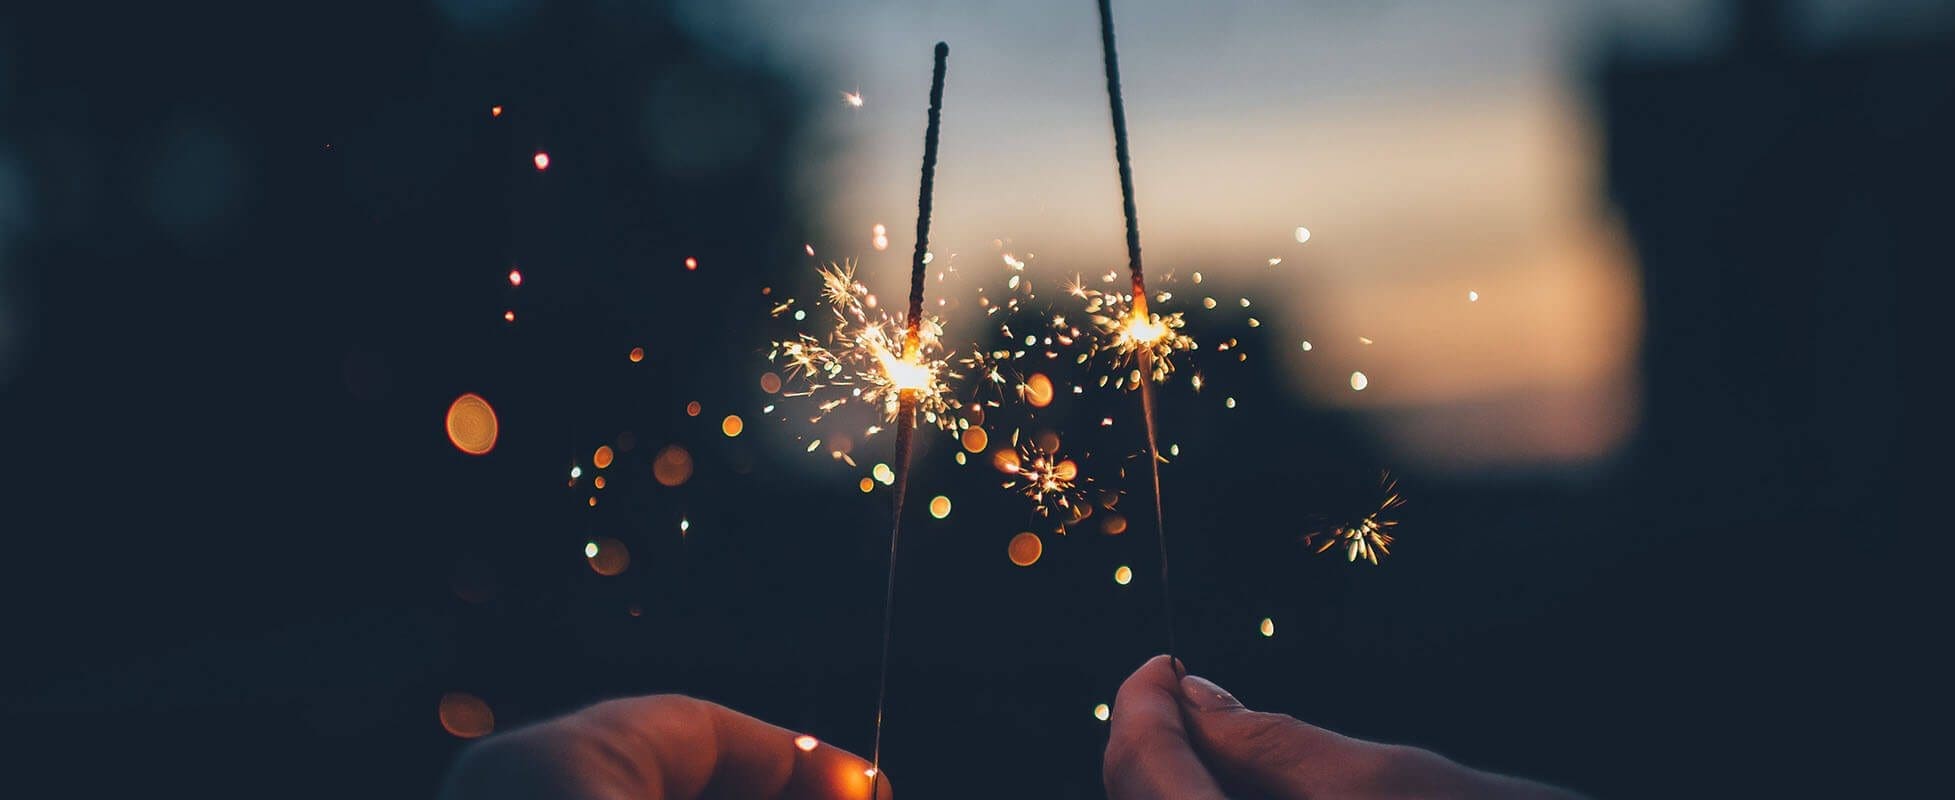 people playing with sparklers